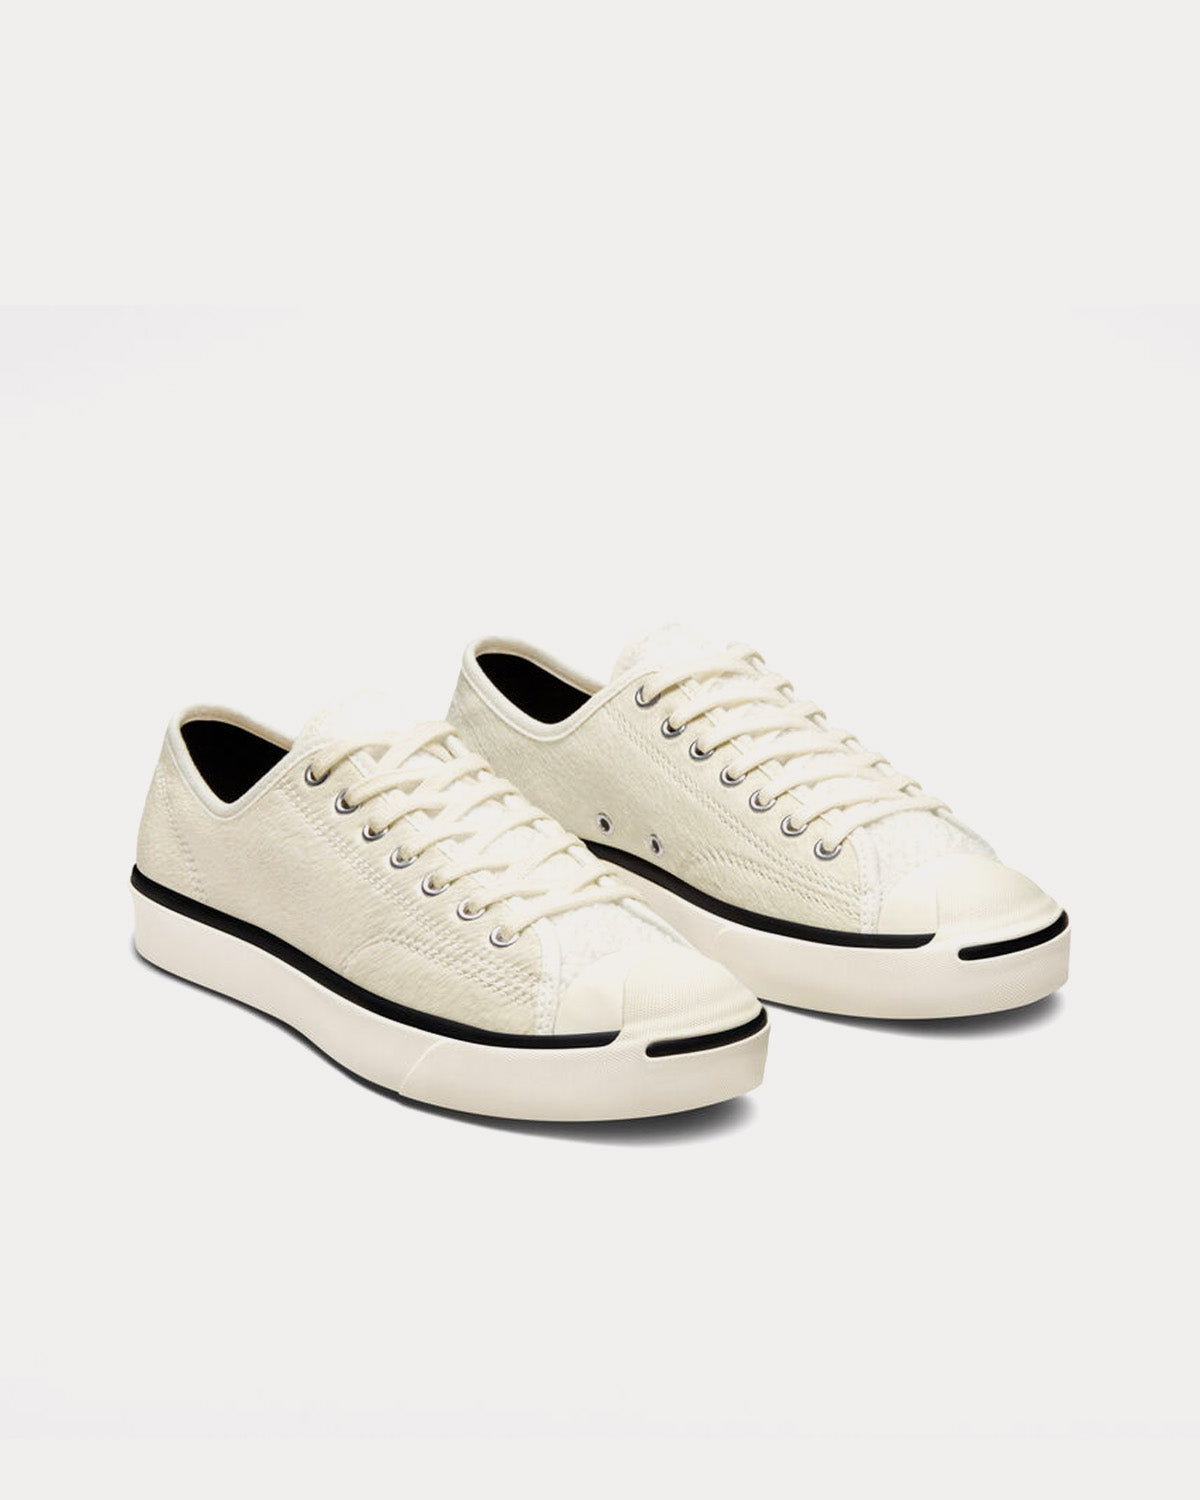 Converse - x CLOT Jack Purcell White / Black / Grey Low Top Sneakers